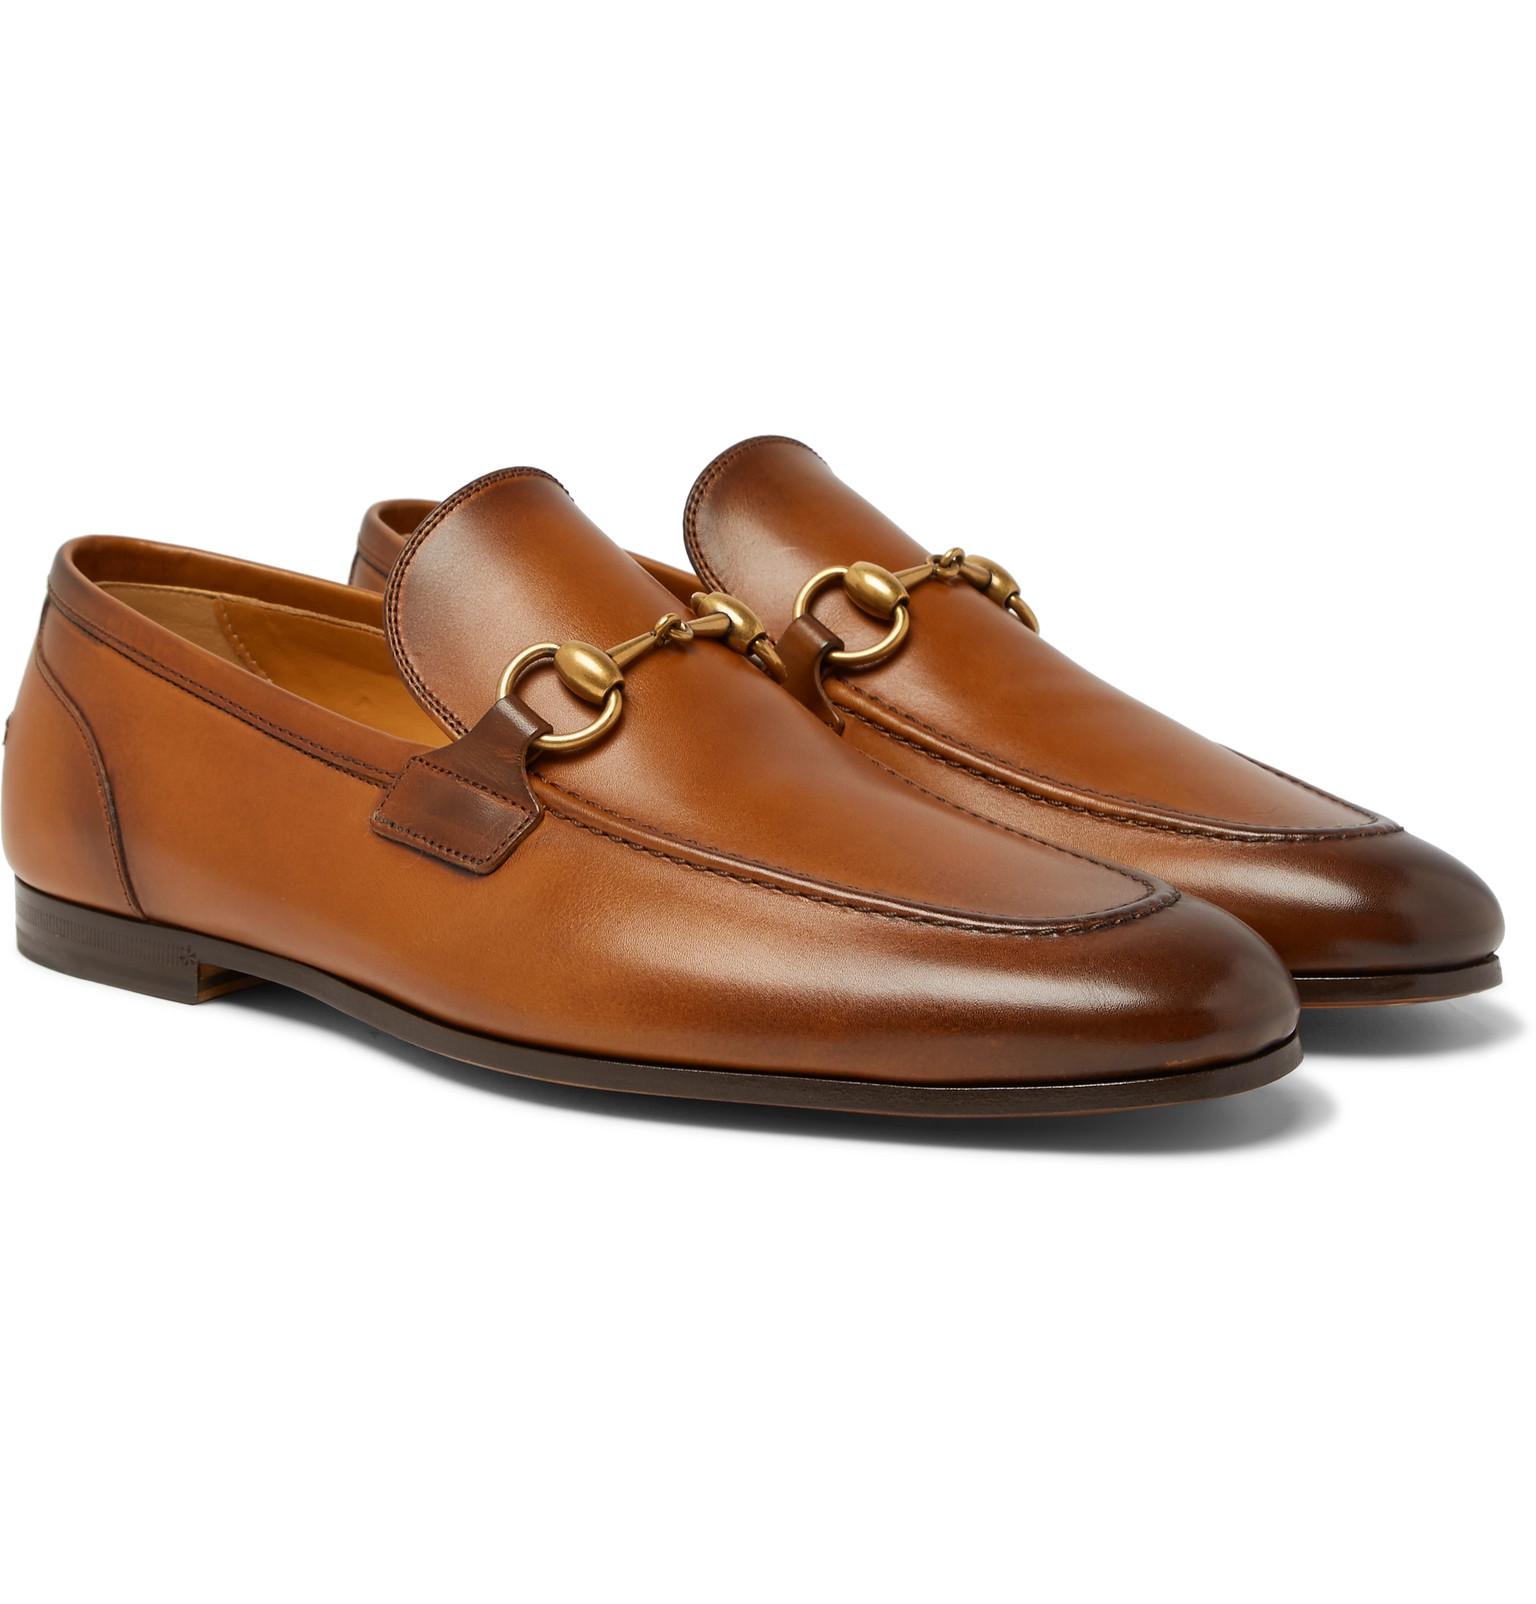 Lyst - Gucci Jordaan Horsebit Burnished-leather Loafers in Brown for Men